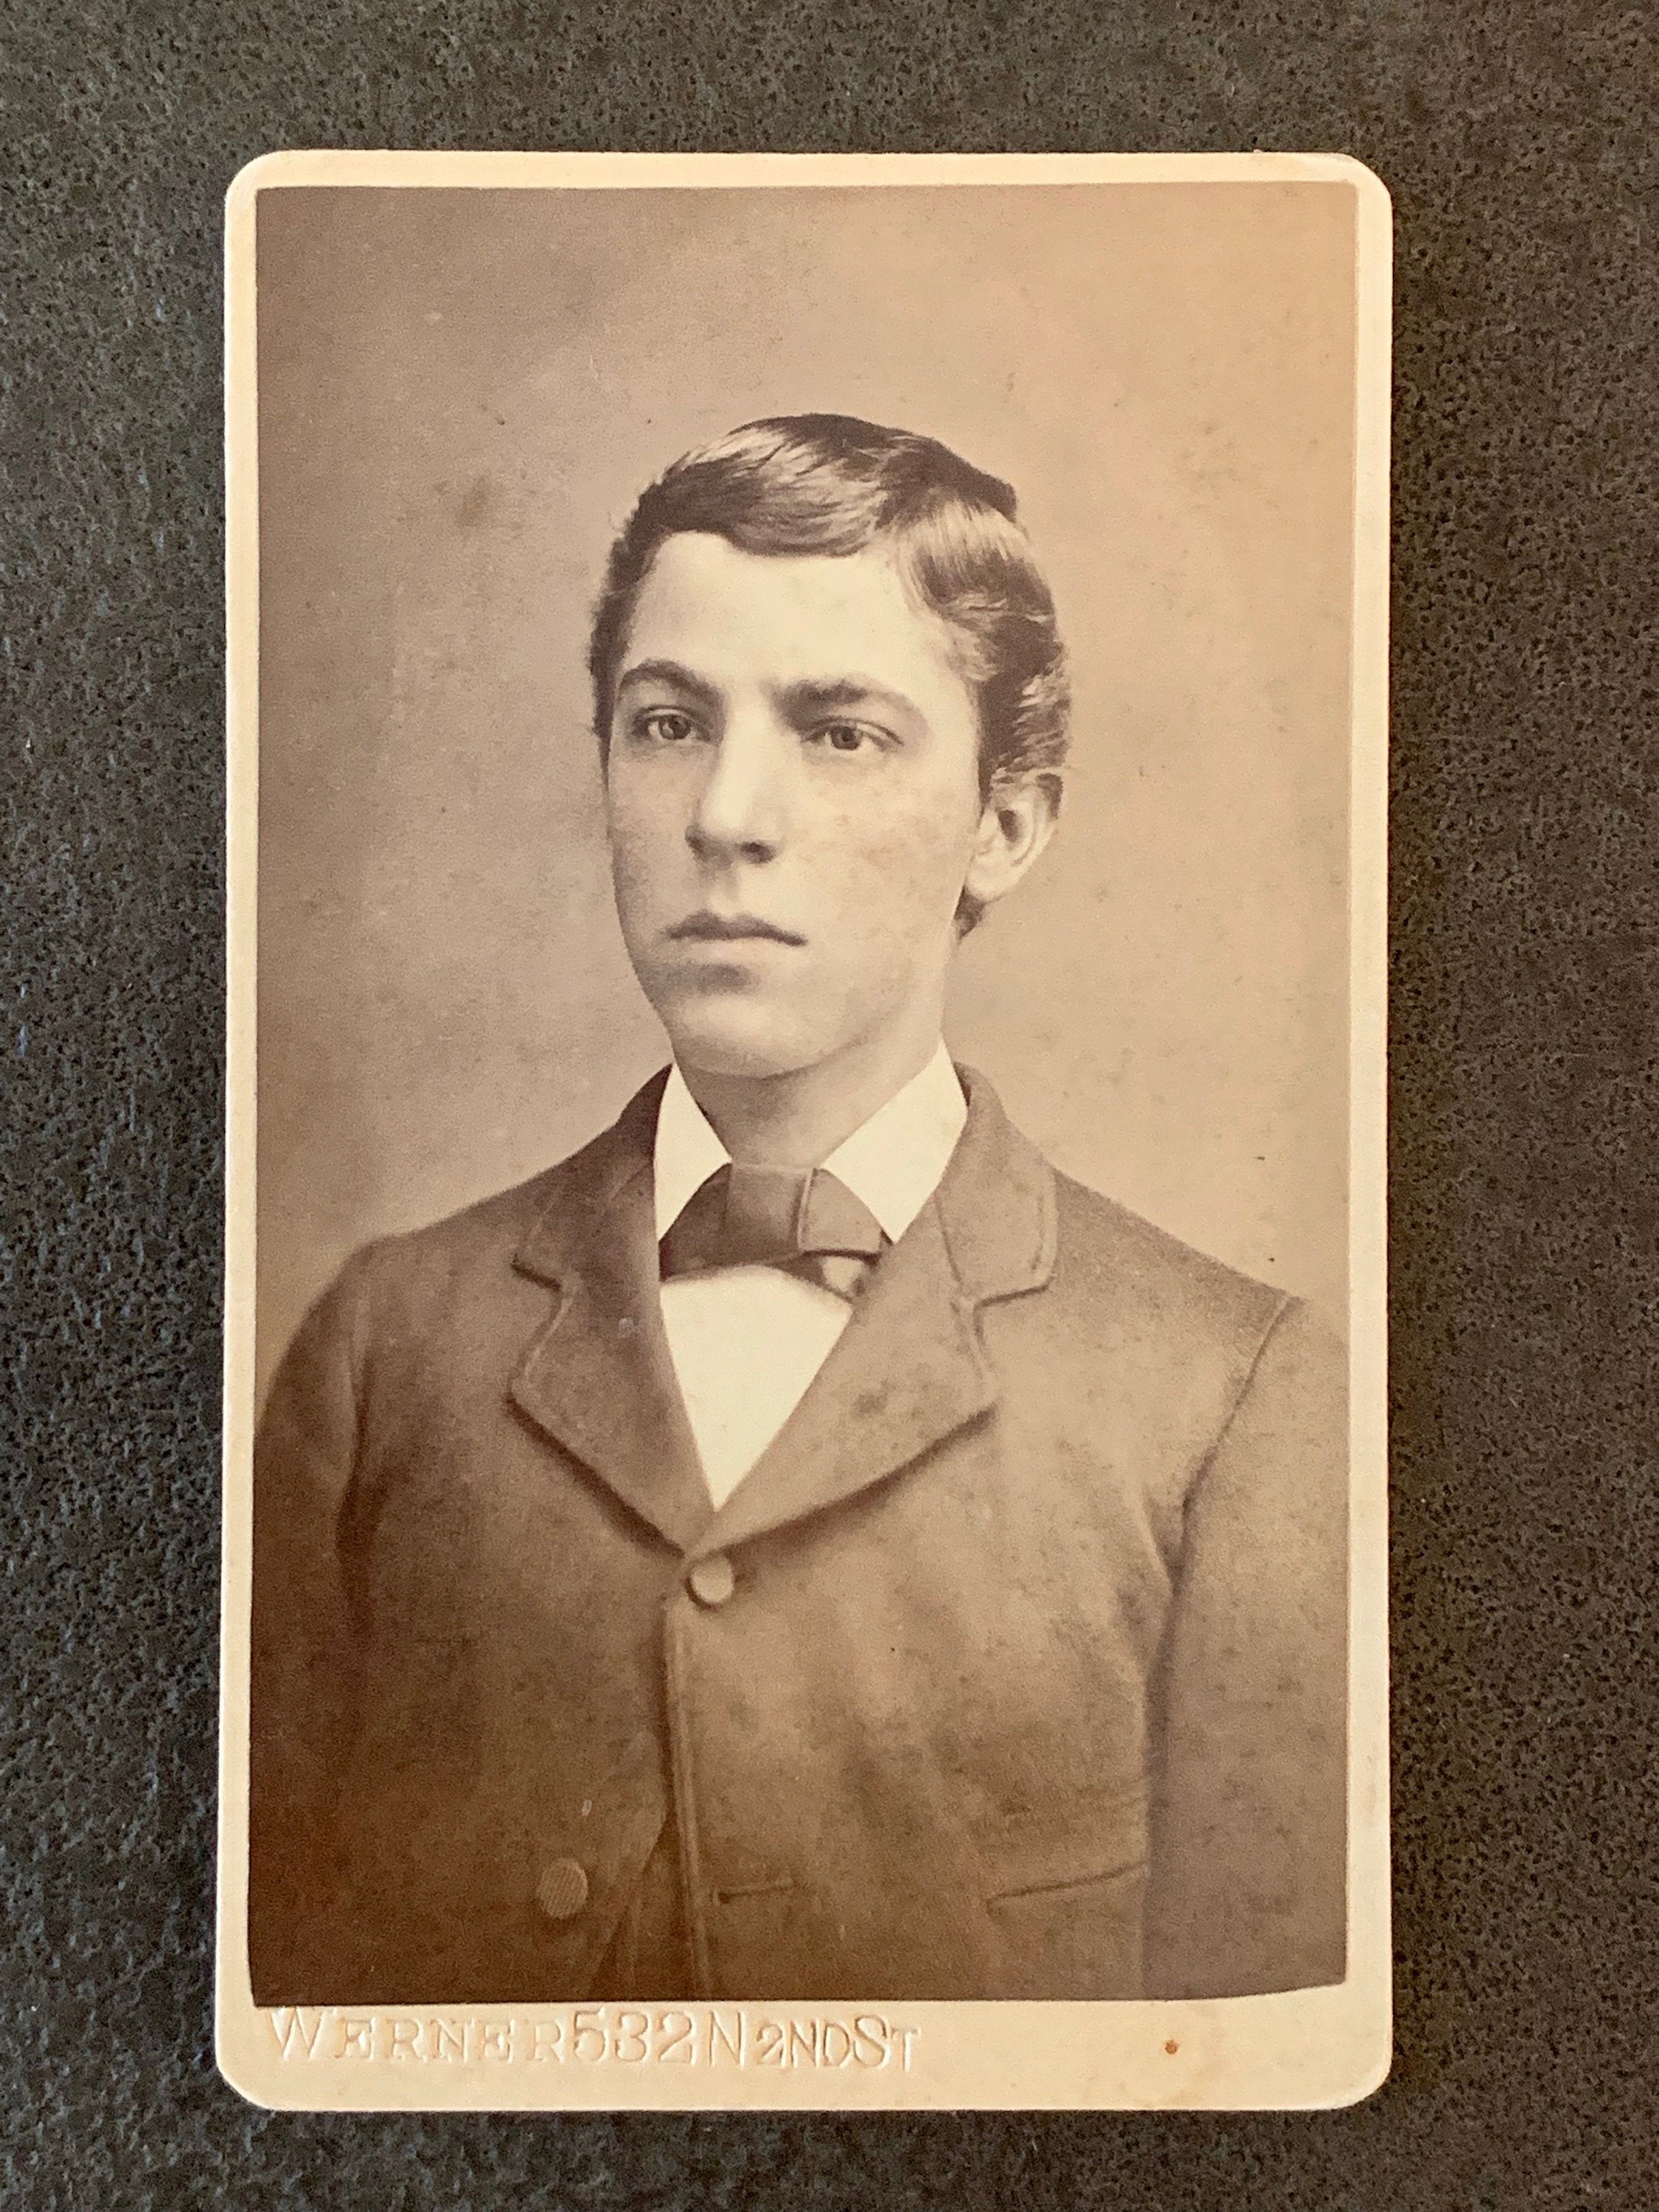 Vintage Photograph Cabinet Card "Portrait of Young Man in Suit and Tie" Early 1900's